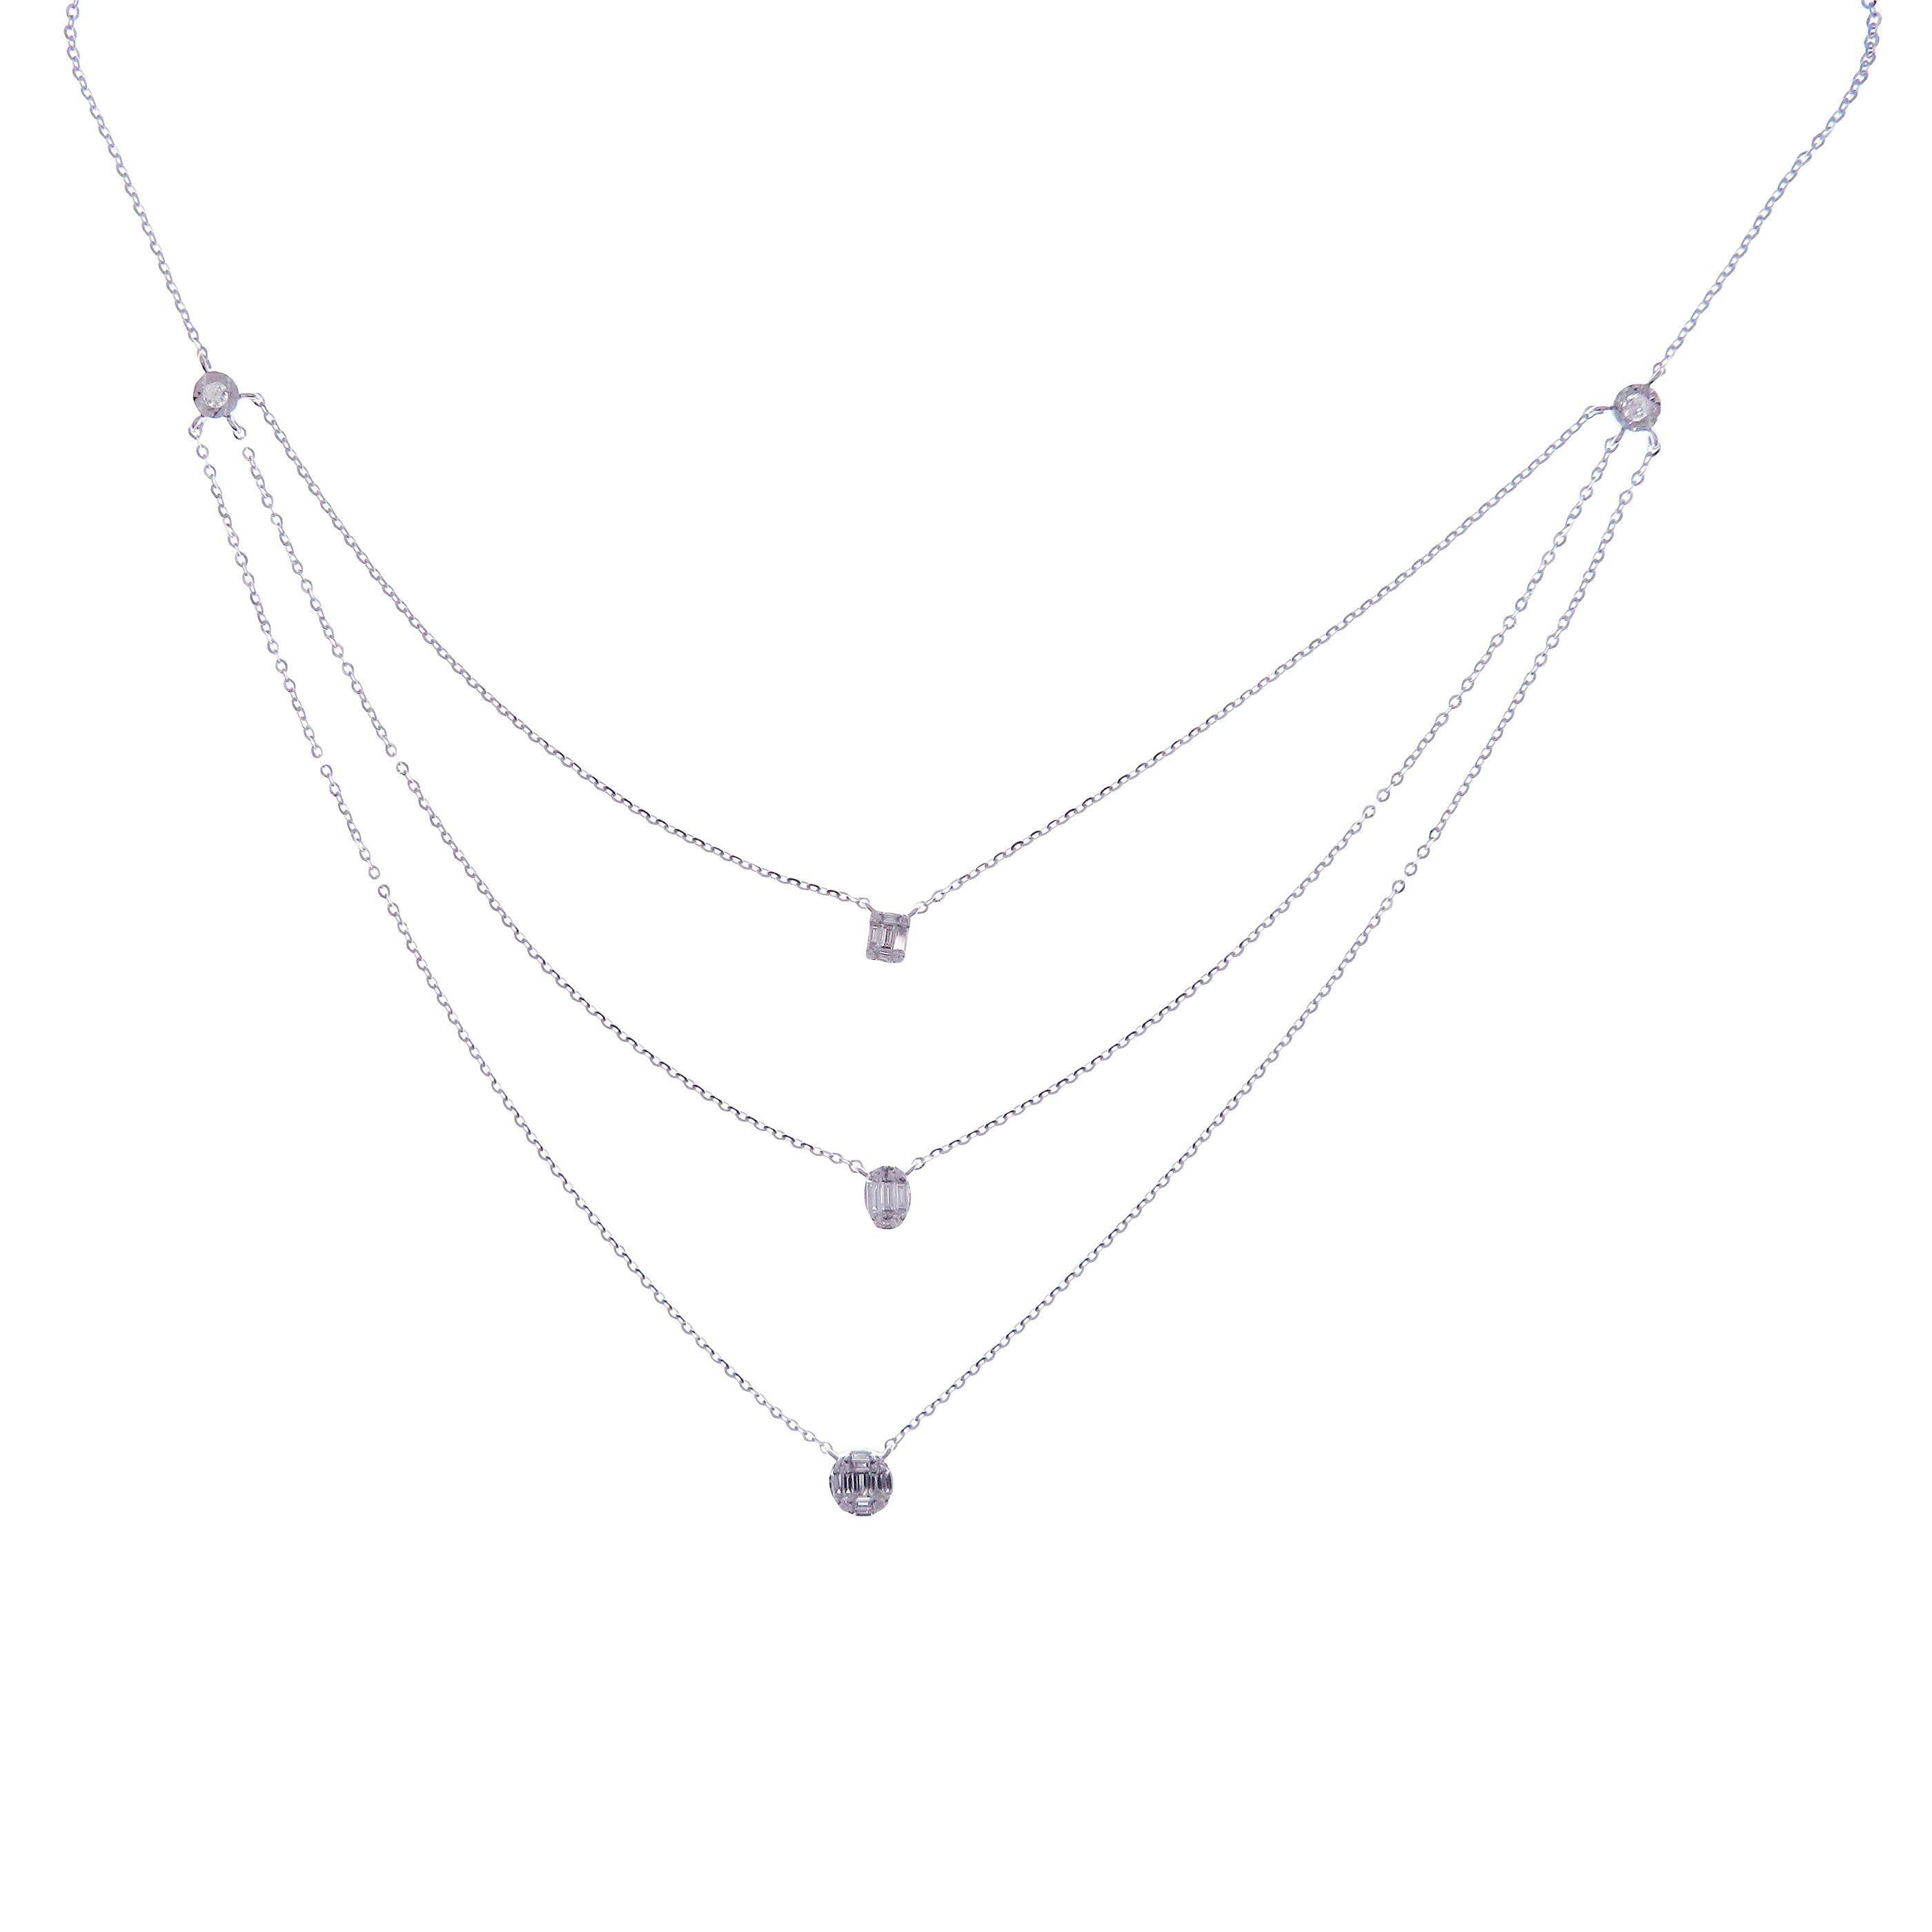 This diamond triple strand necklace is crafted in 18-karat white gold, weighing approximately 0.52 total carats of SI-V Quality white diamonds.

Necklace is 16